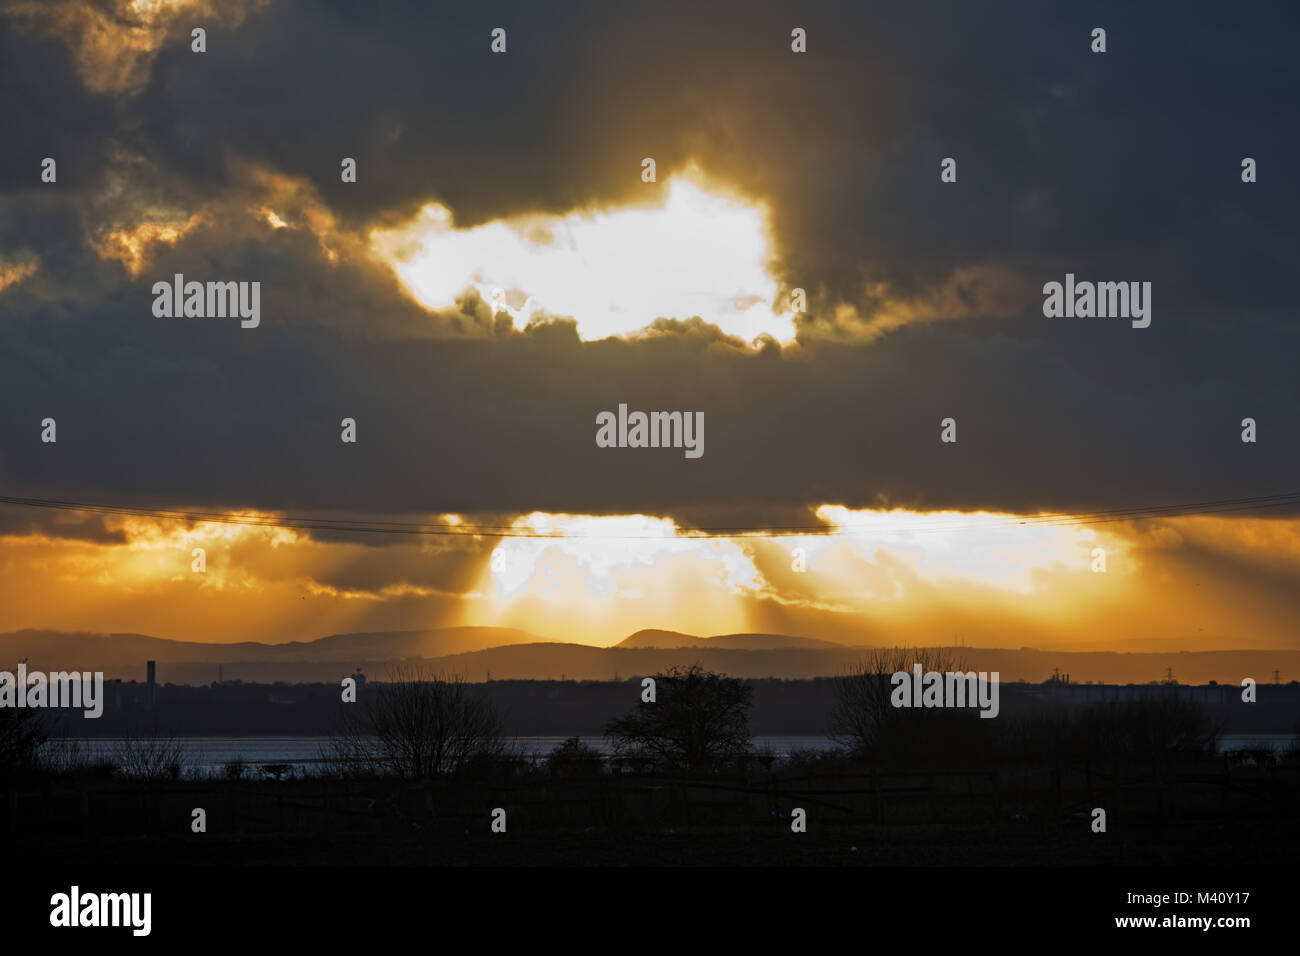 Sun bursts through stormy clouds at sunset over the River Mersey Liverpool UK. Stock Photo